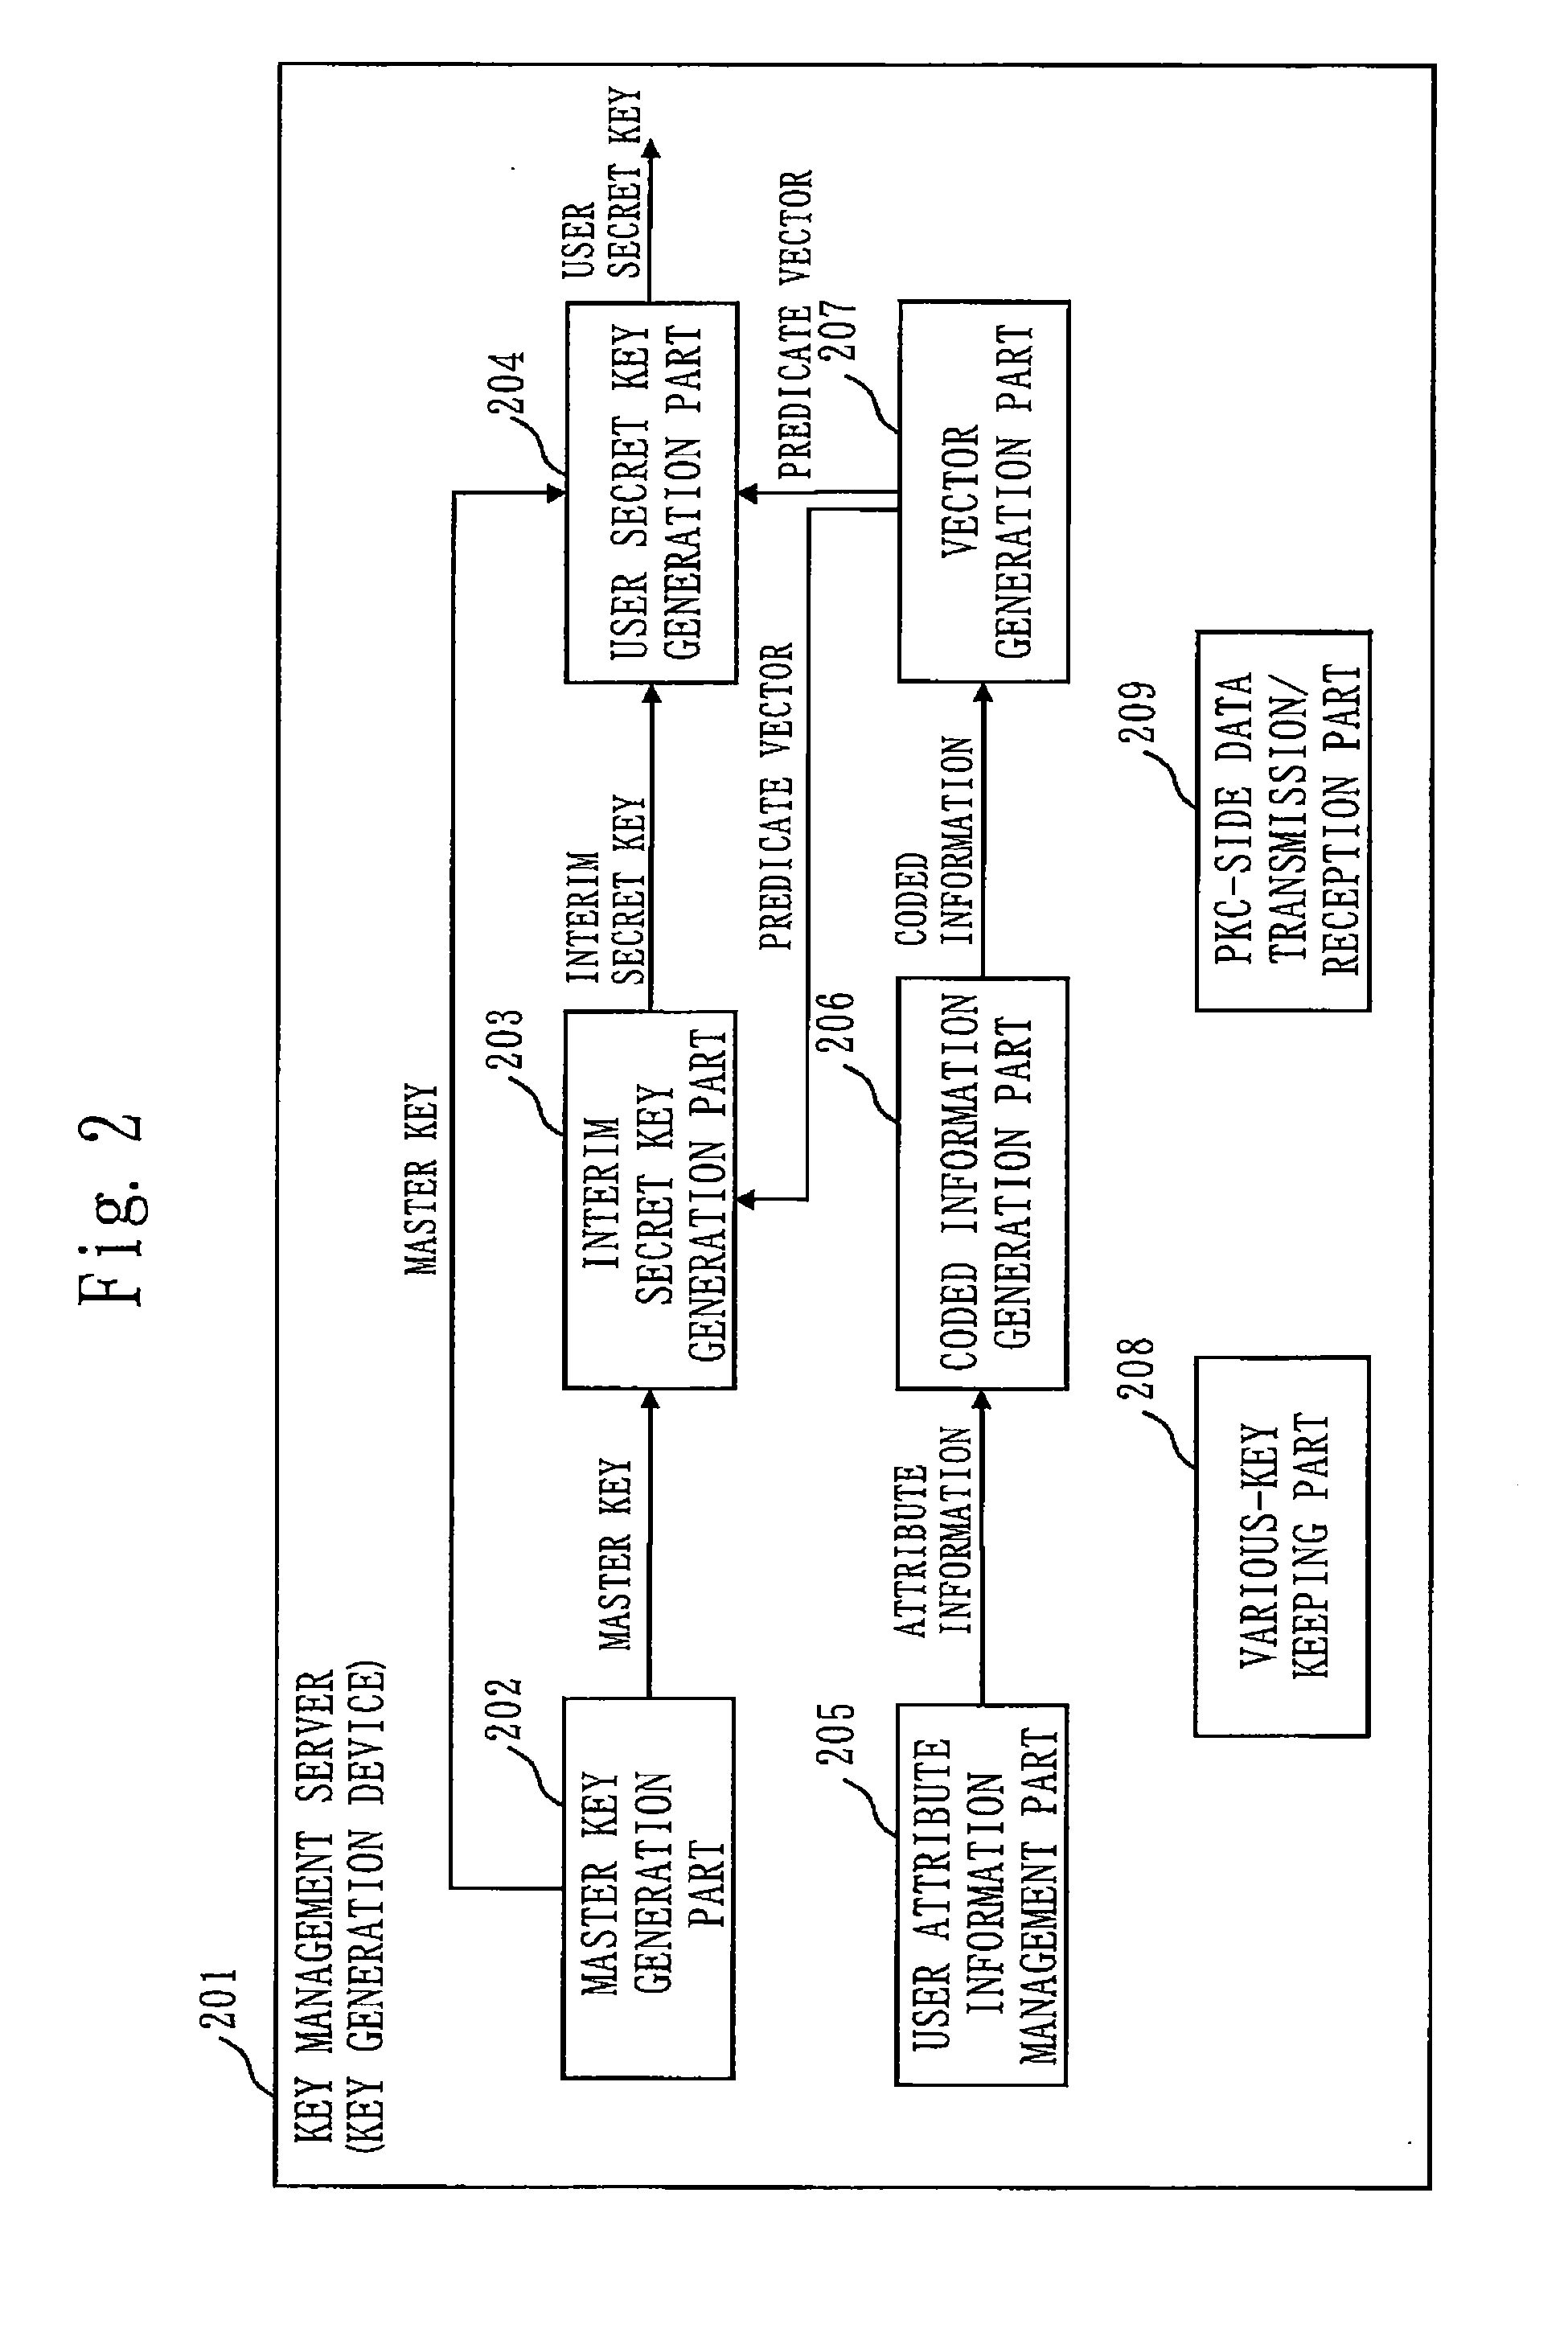 Confidential search system and cryptographic processing system